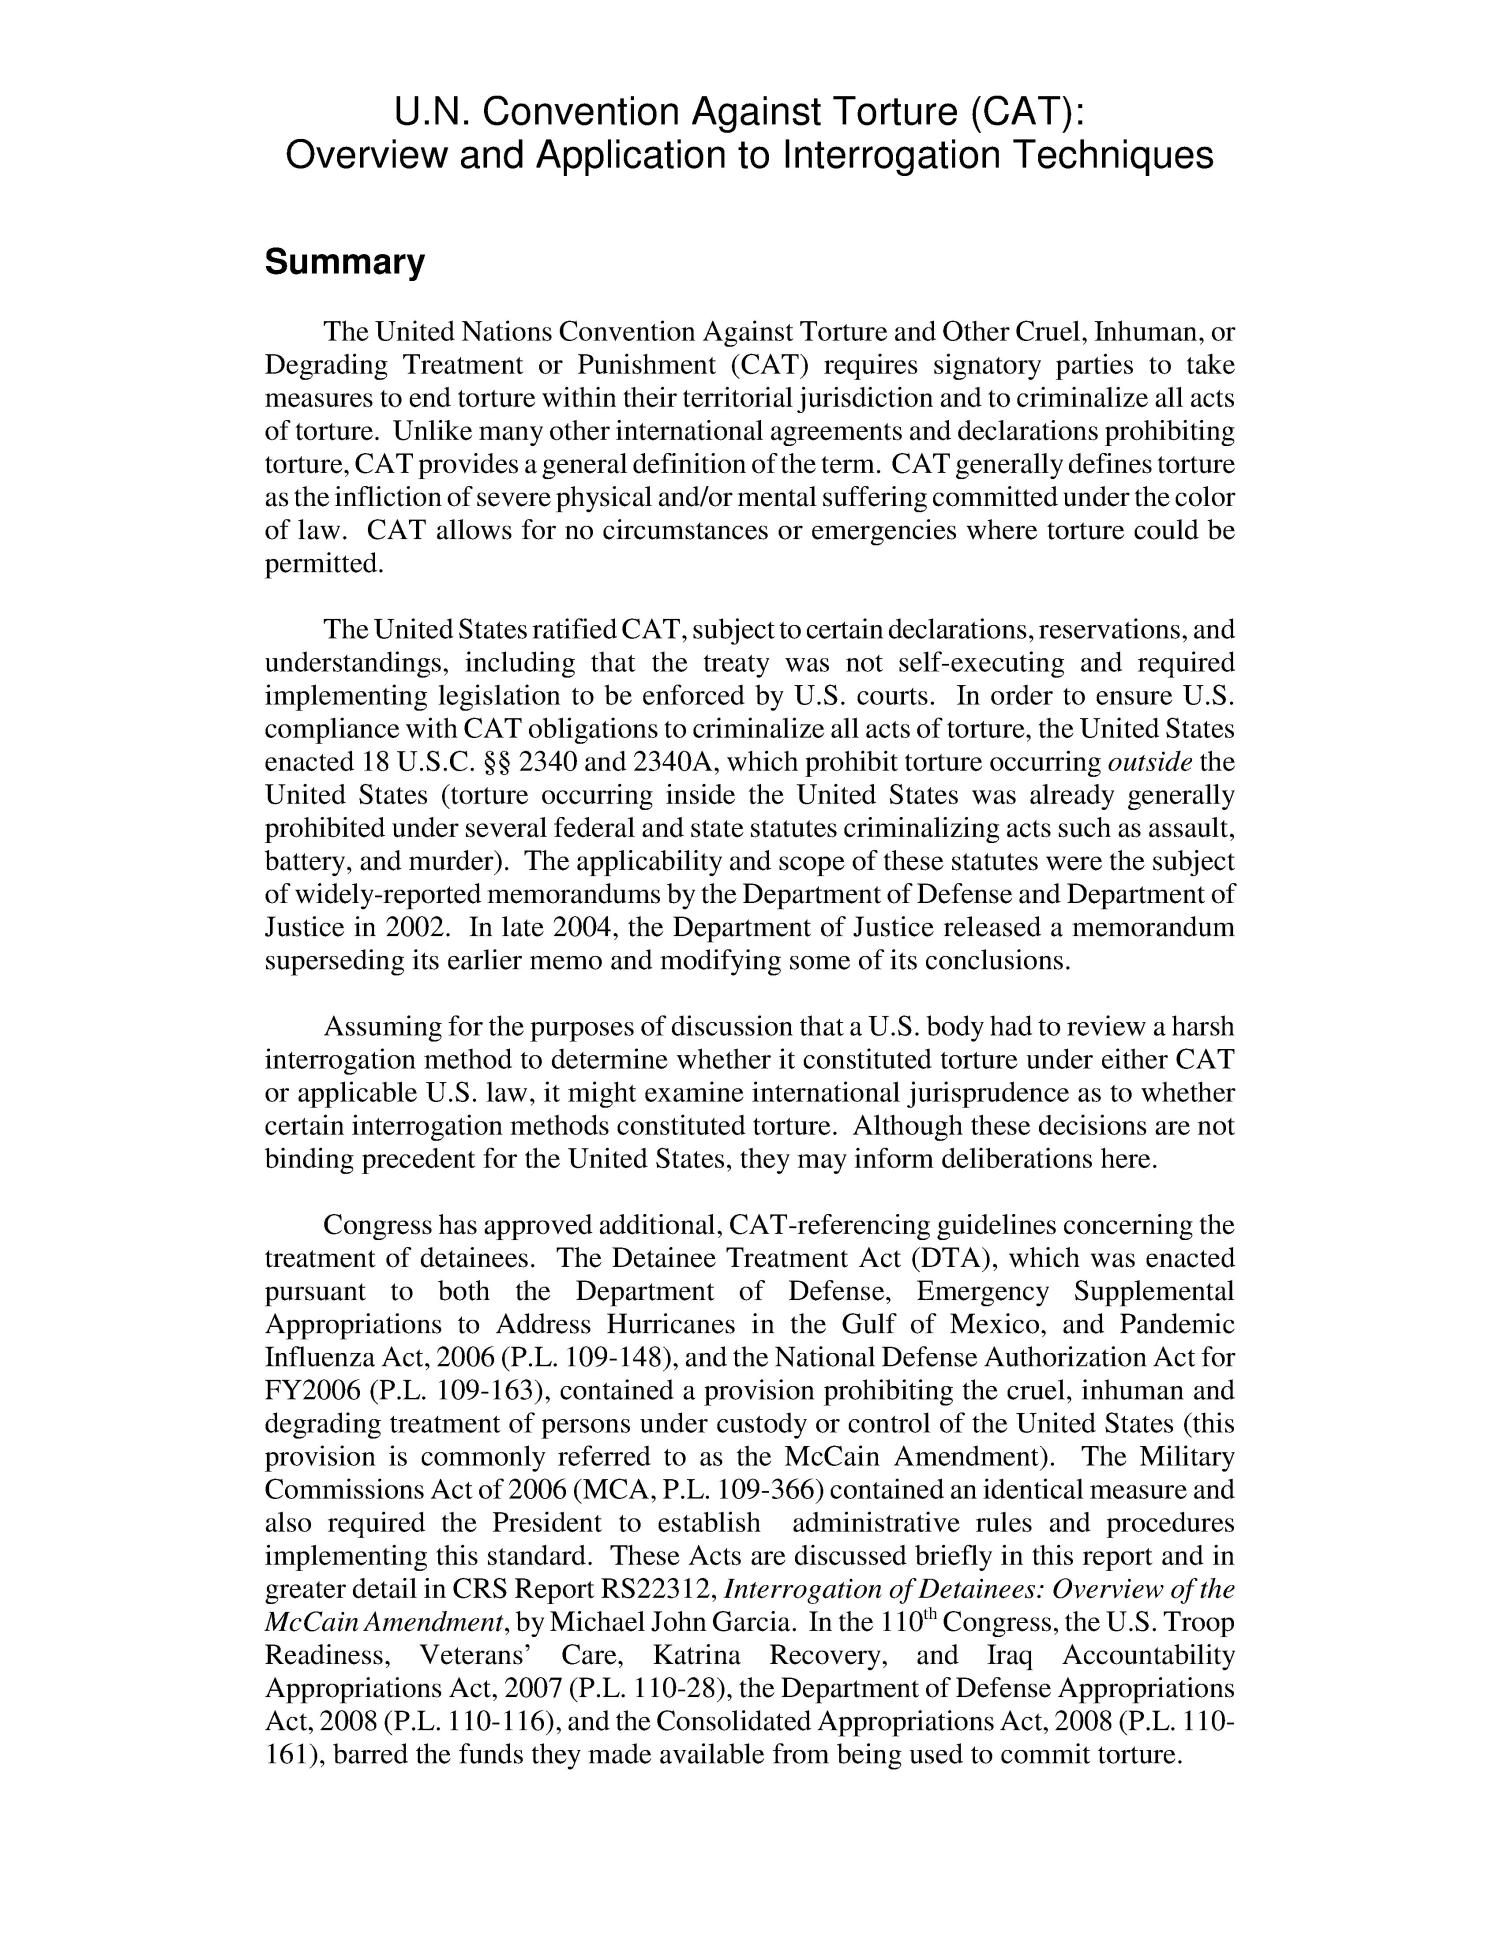 U.N. Convention Against Torture (CAT): Overview and Application to Interrogation Techniques
                                                
                                                    [Sequence #]: 2 of 26
                                                